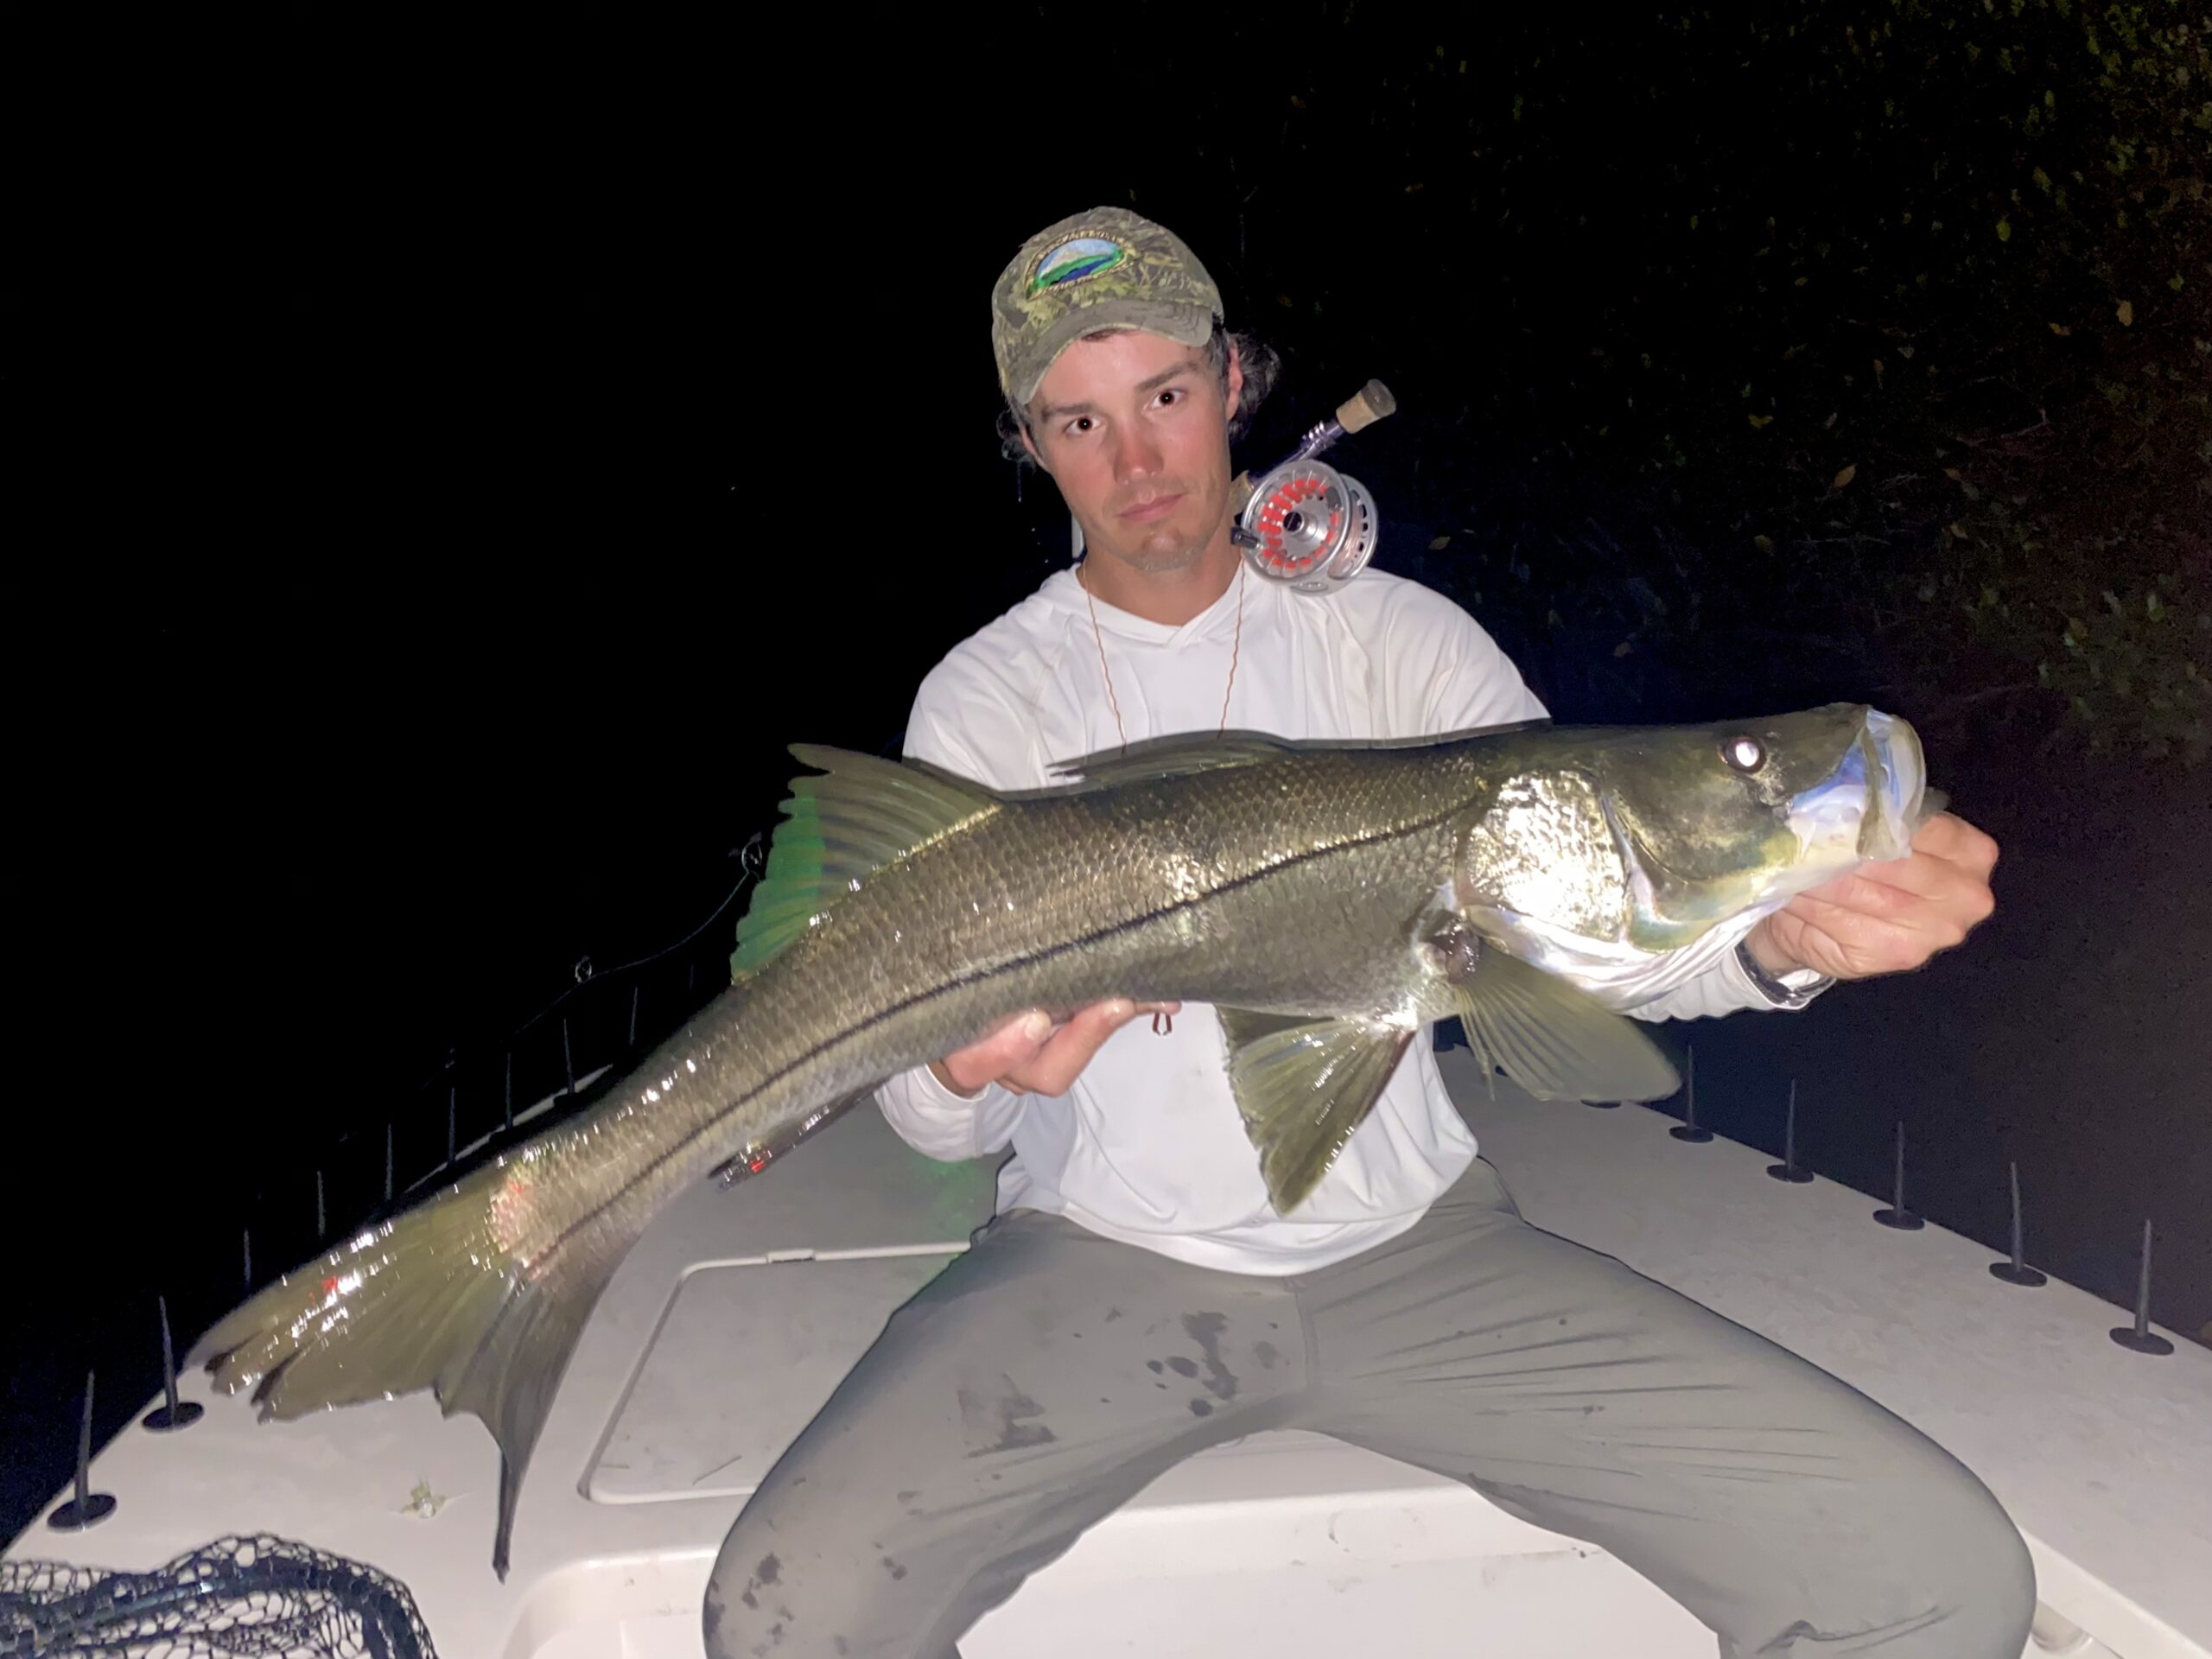 An angler holds a snook up for the camera